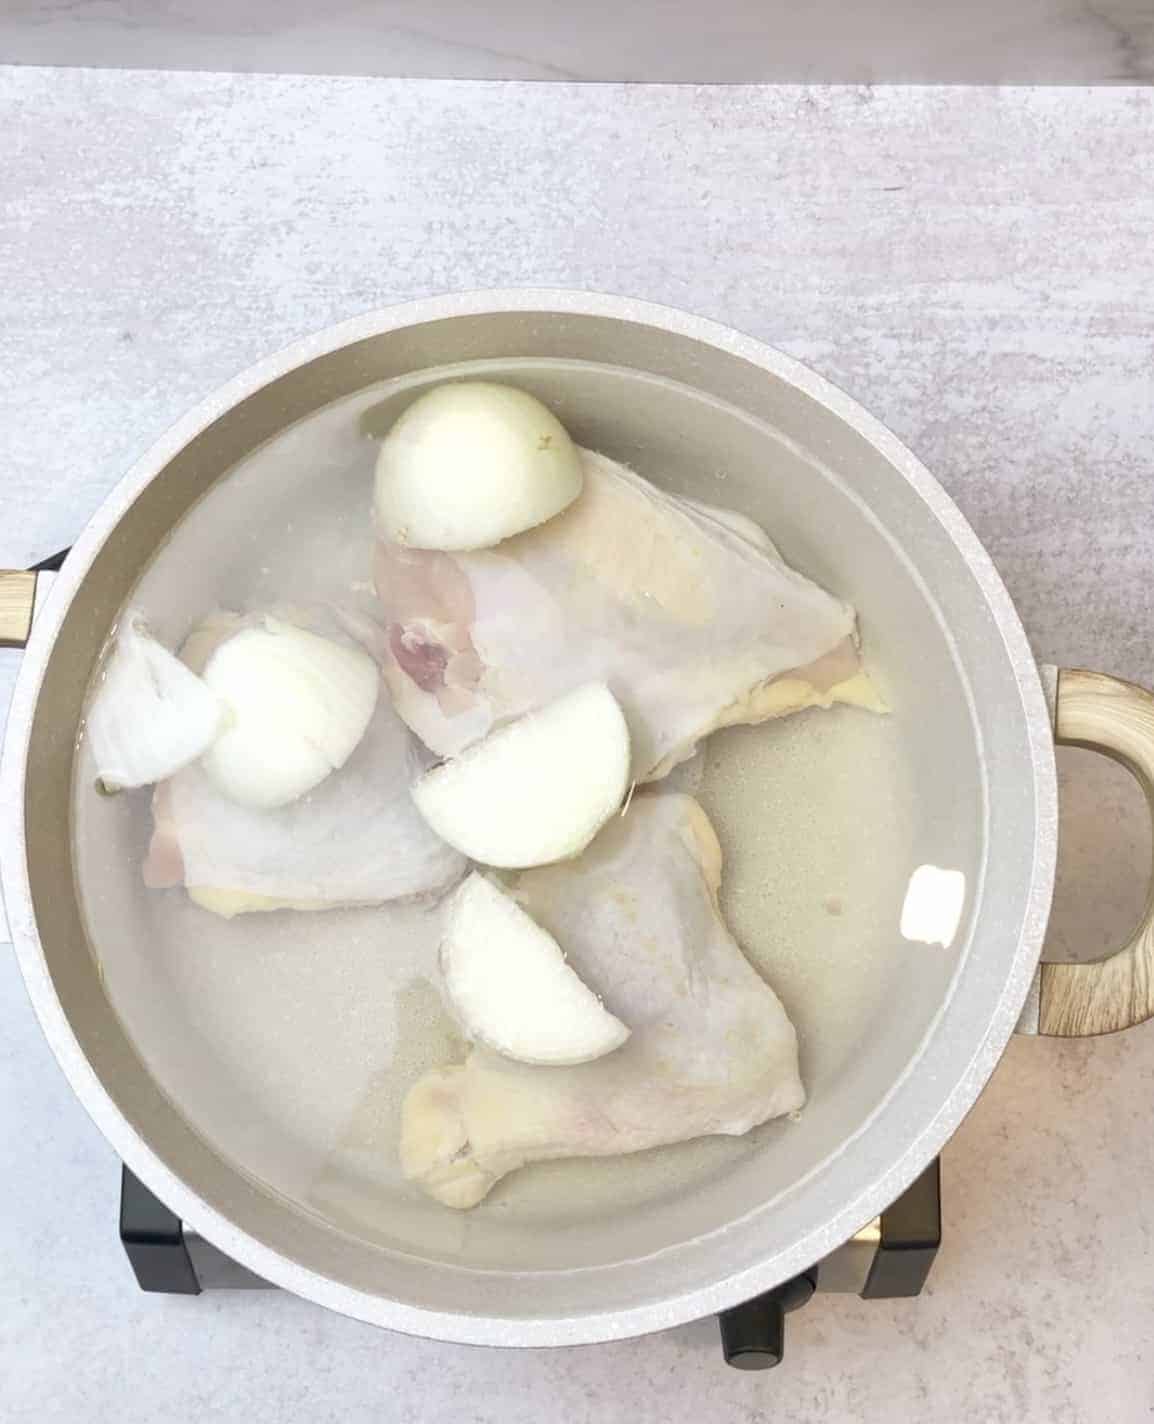 the first step to prepare mloukhieh is to boil the whole chicken or chicken breast in a deep pot with halved onion